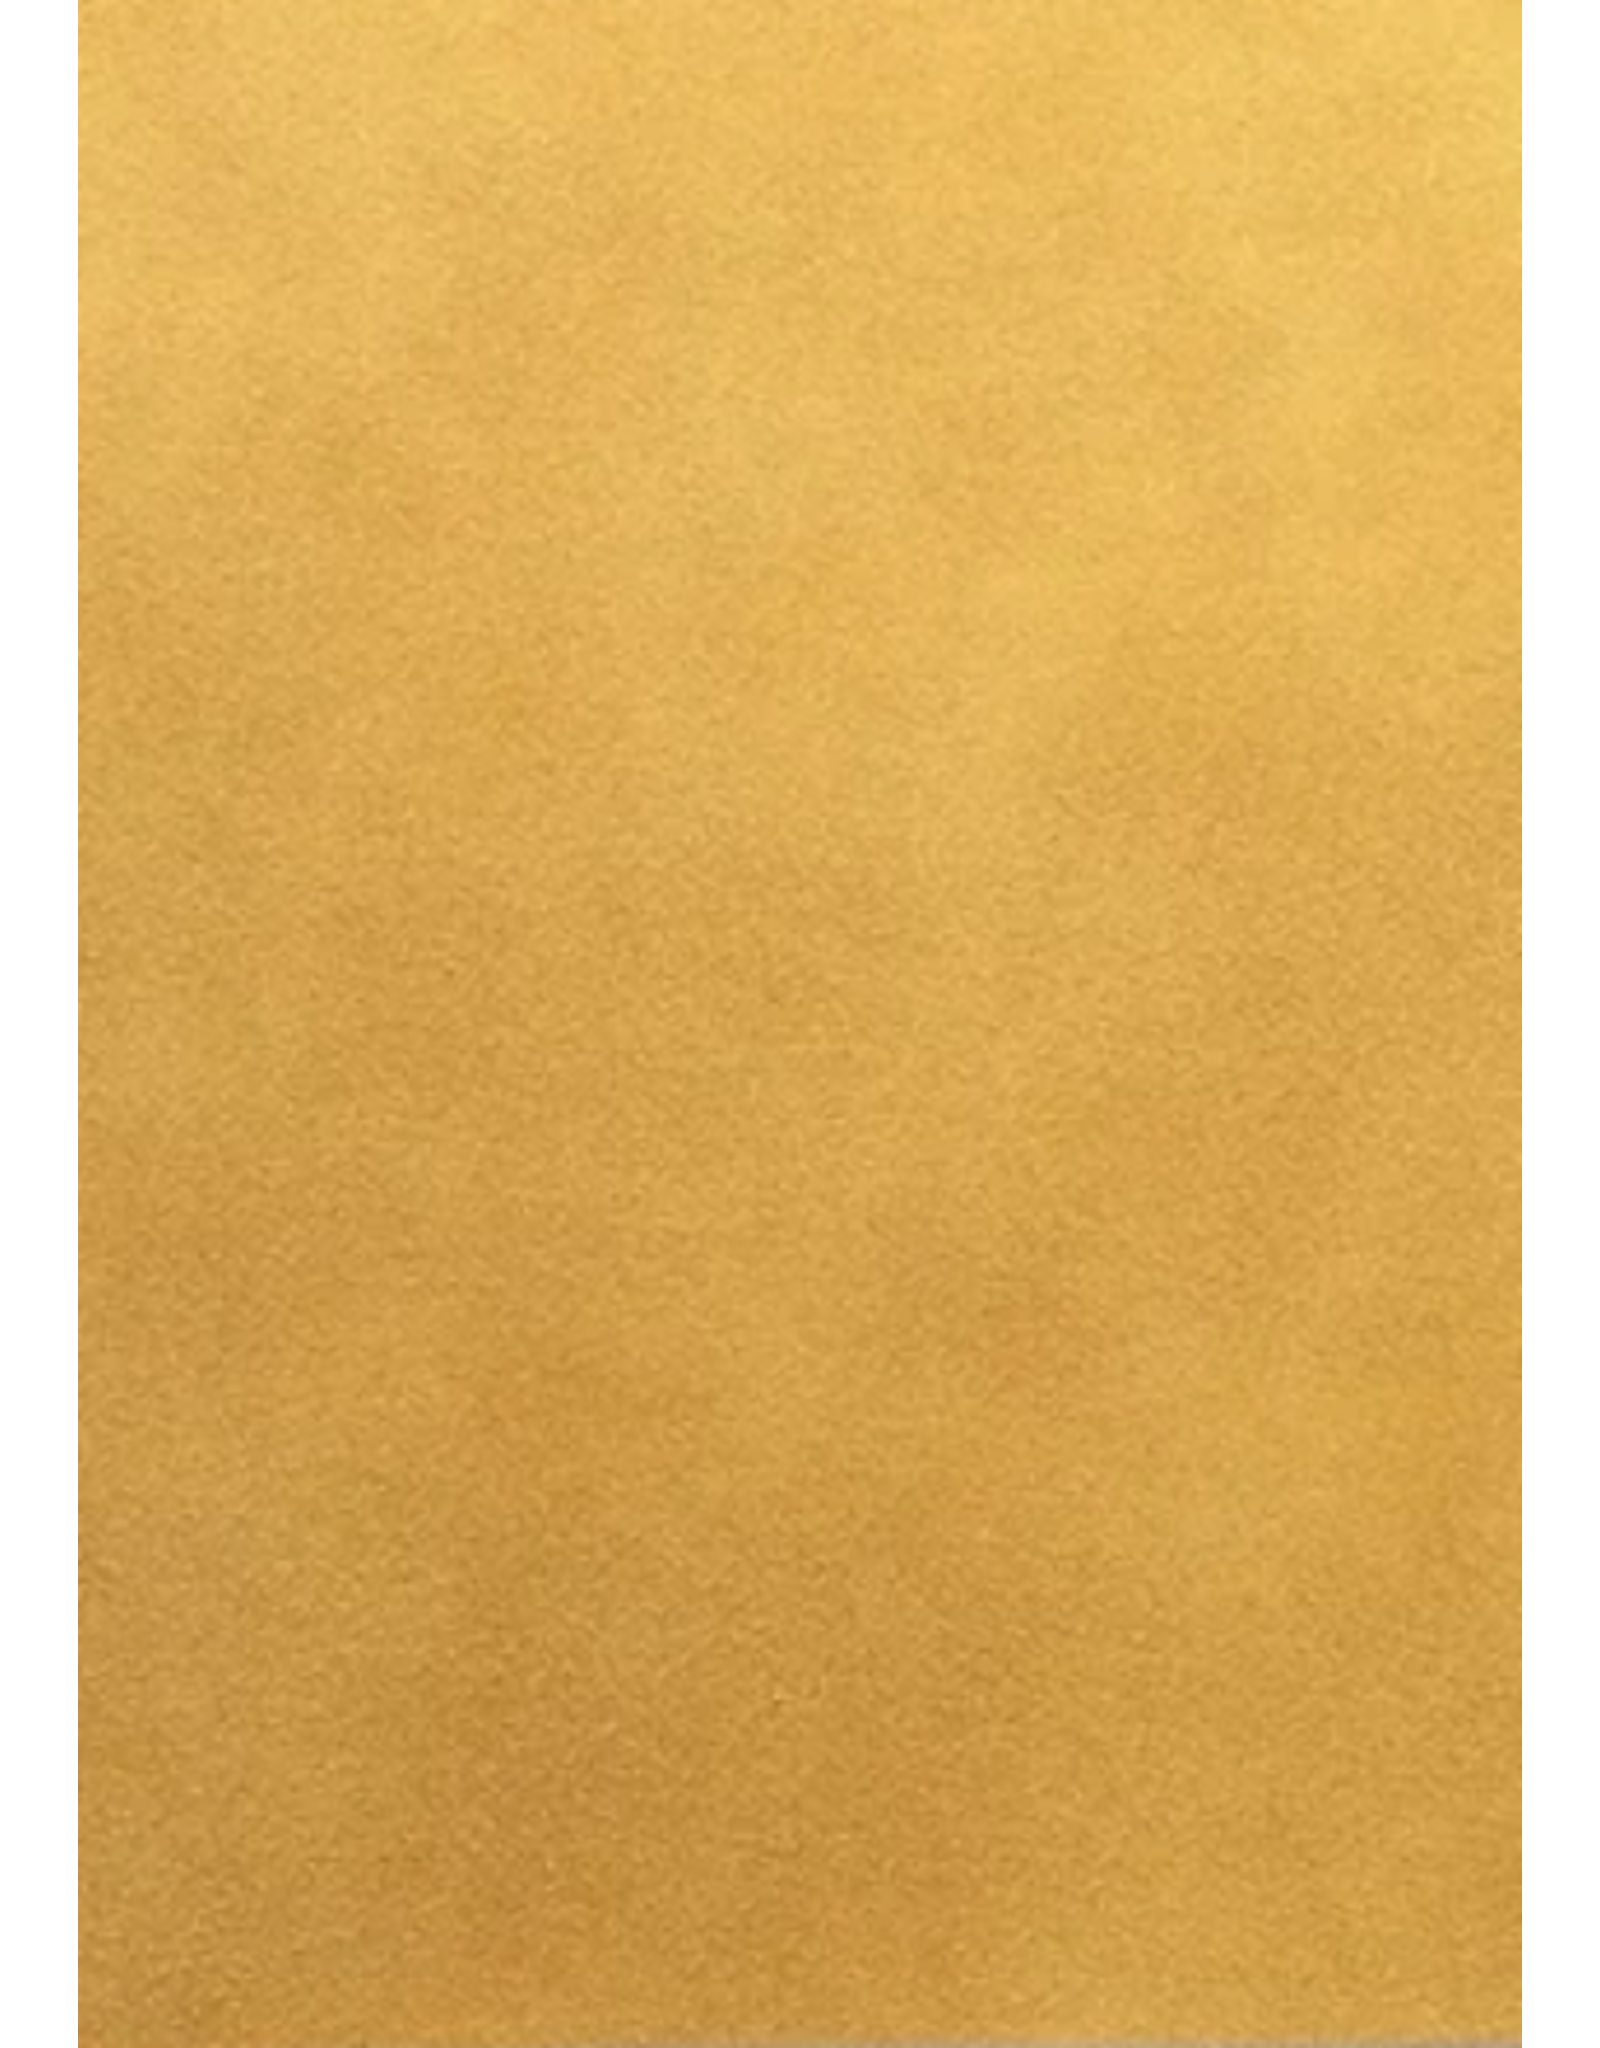 Faux Leather Beading Backing Deer Suede   .8mm thick 8x11"